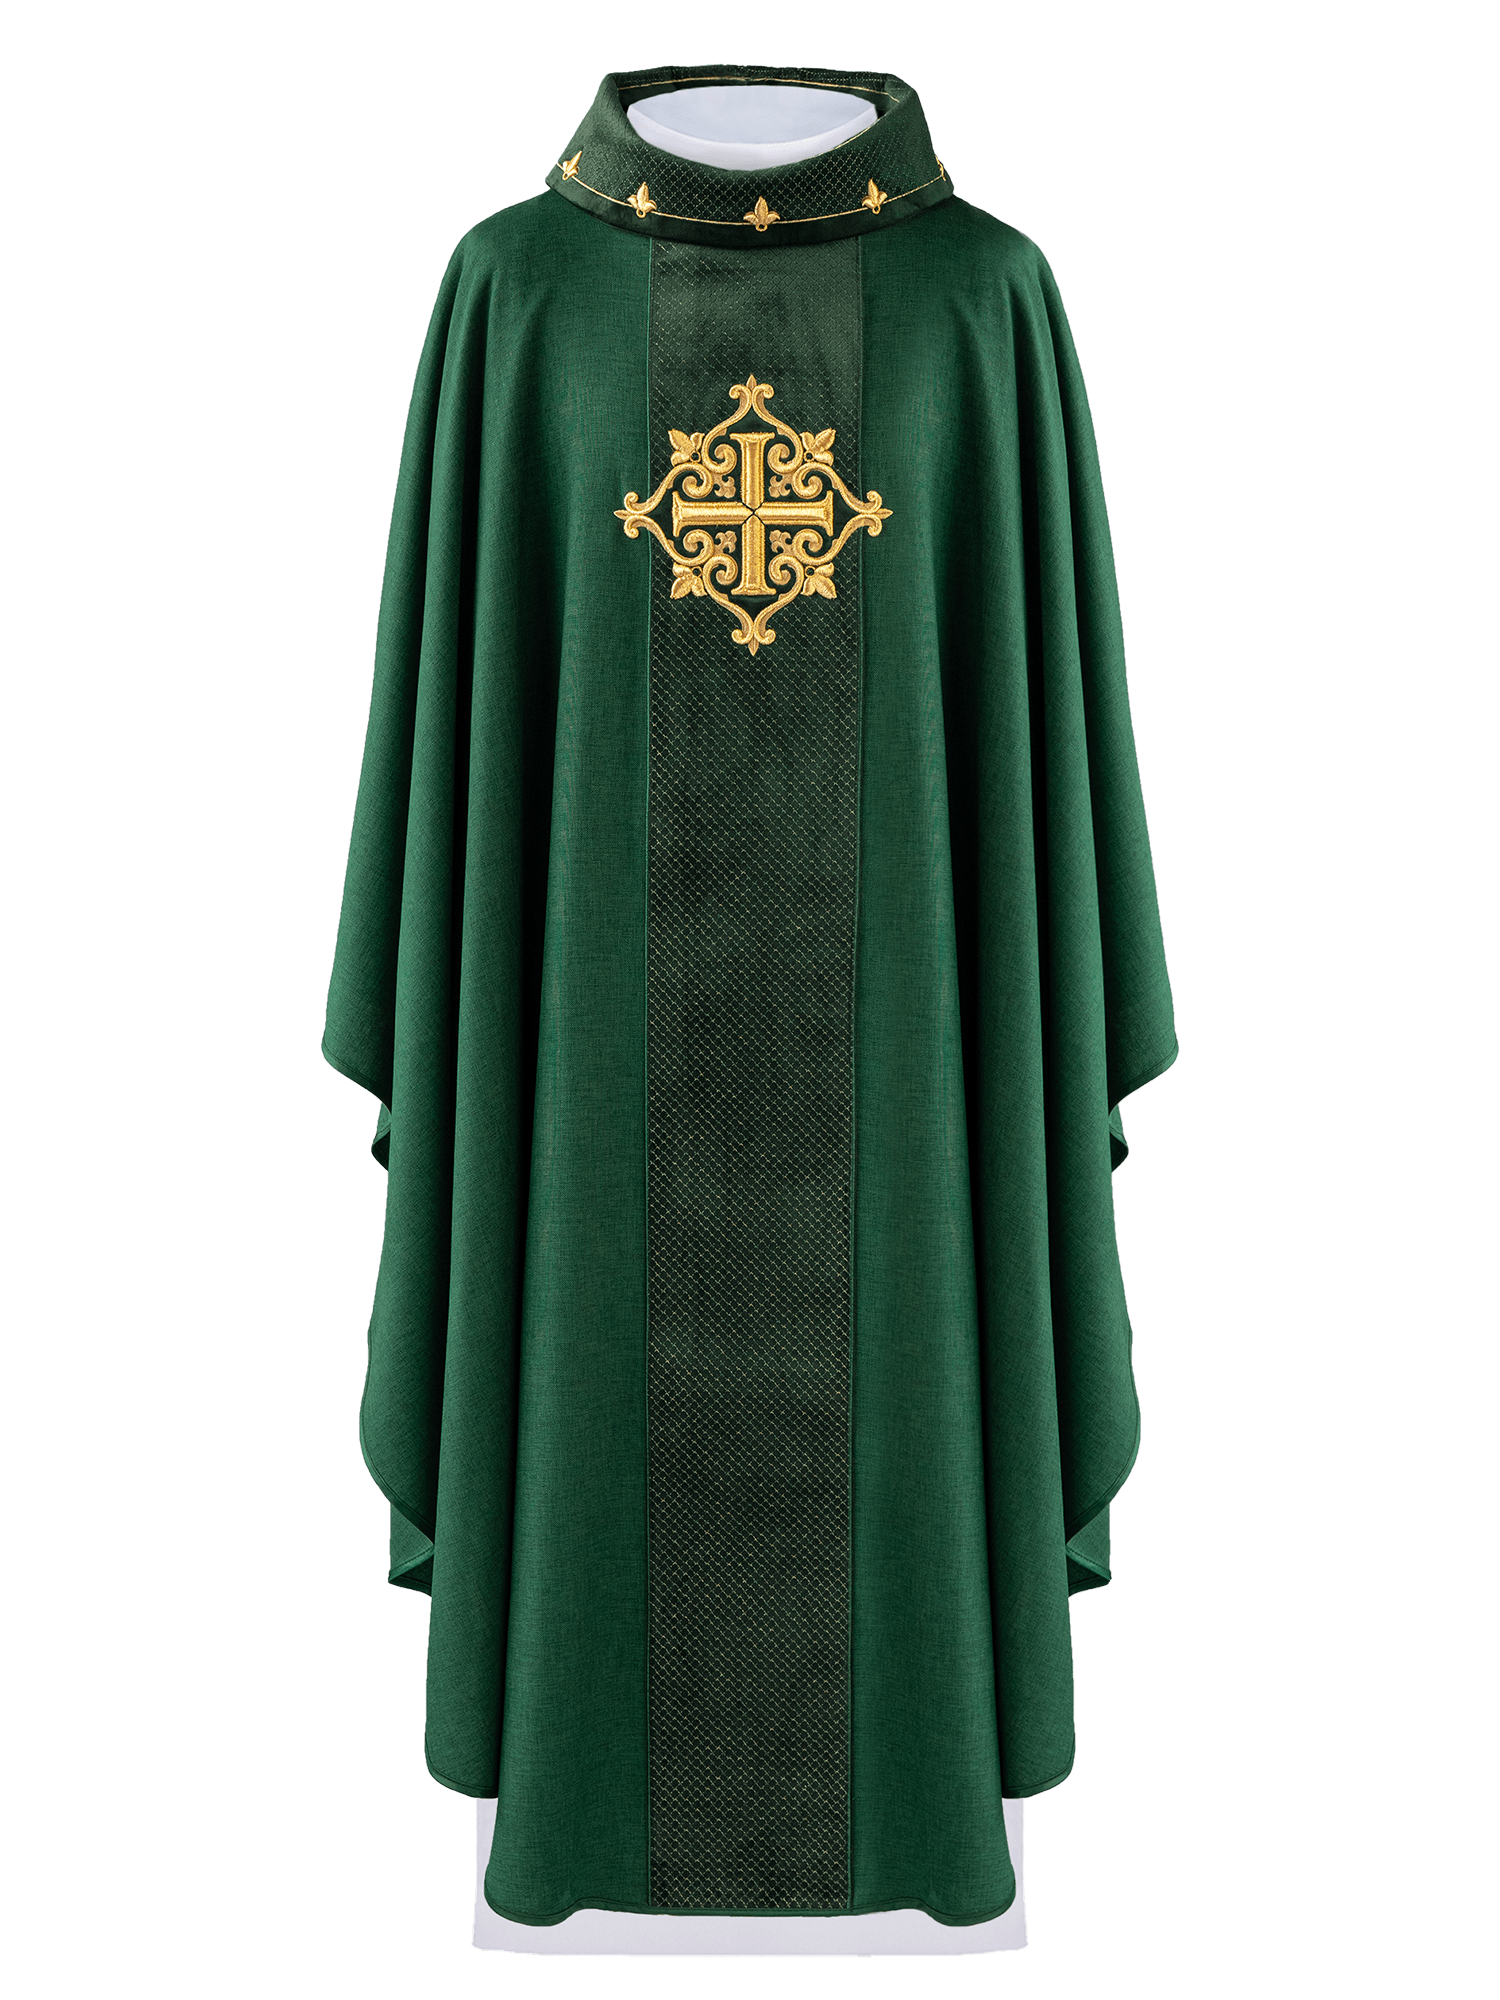 Chasuble embroidered on velvet with the symbol Green Cross